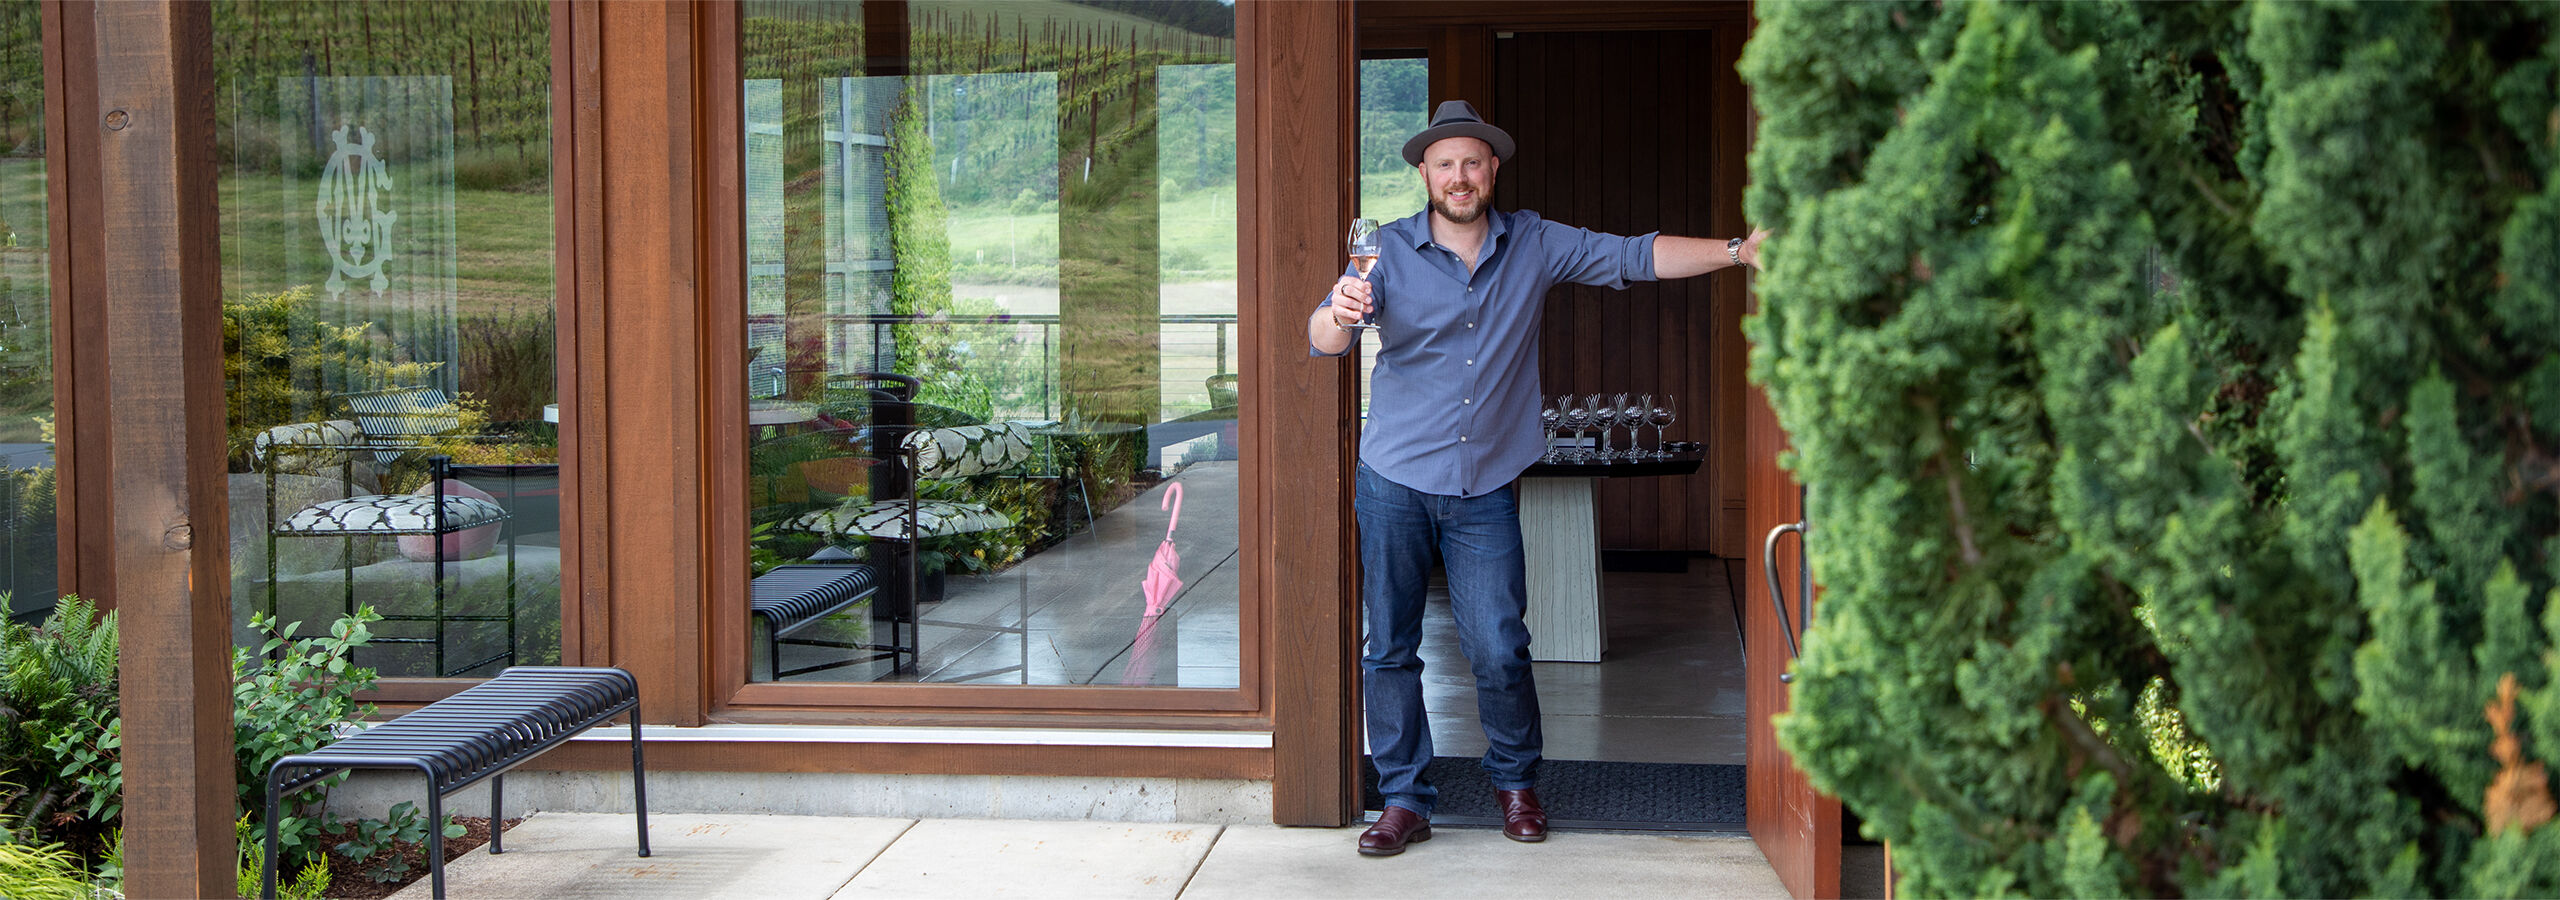 Estate Host with hat holding open the door of the Gran Moraine Tasting room with a glass of rosé wine outstretched as a greeting.